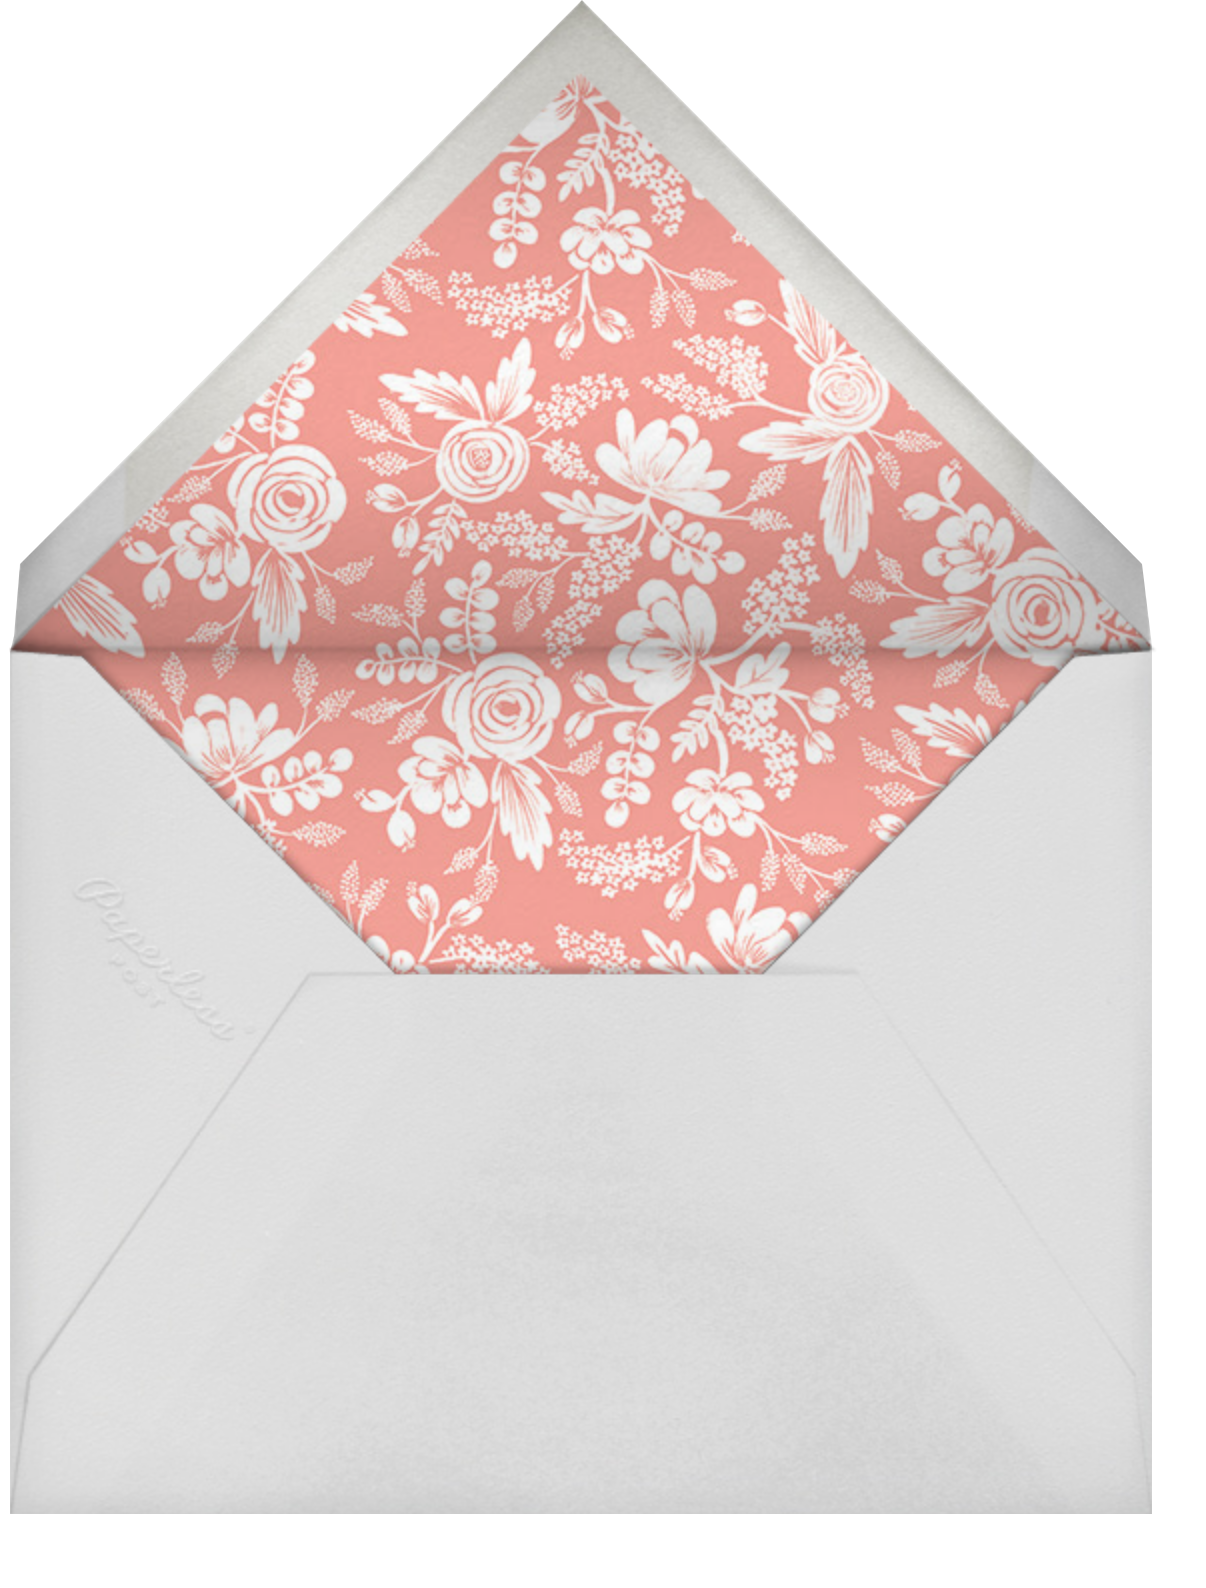 Heather and Lace (Square) - Gold - Rifle Paper Co. - Envelope